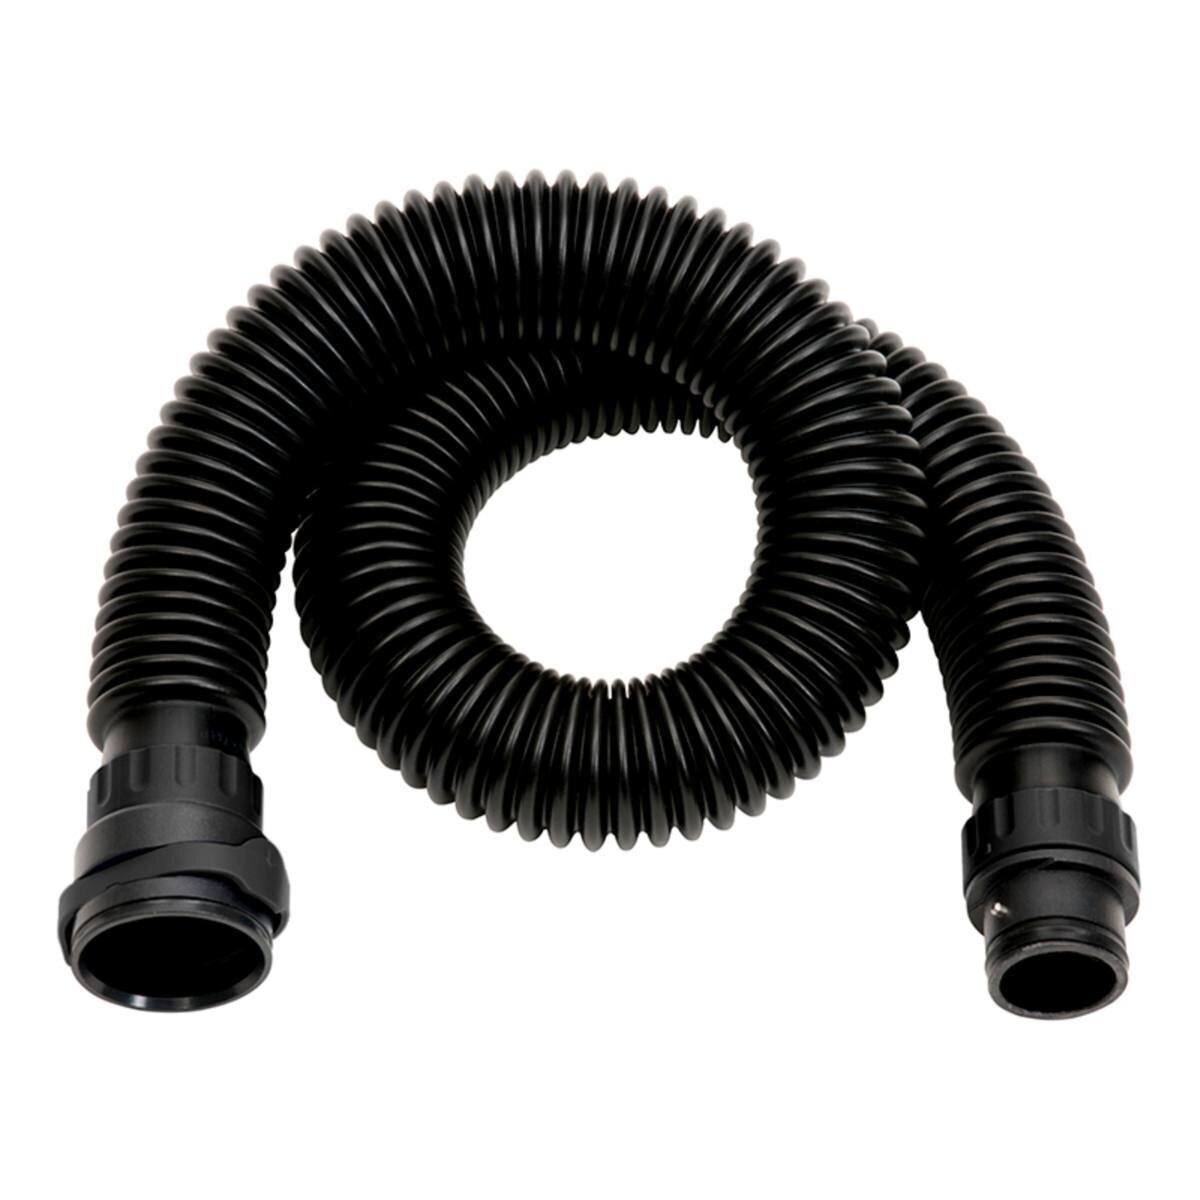 3M air hose, heavy rubber version with QRS #834017